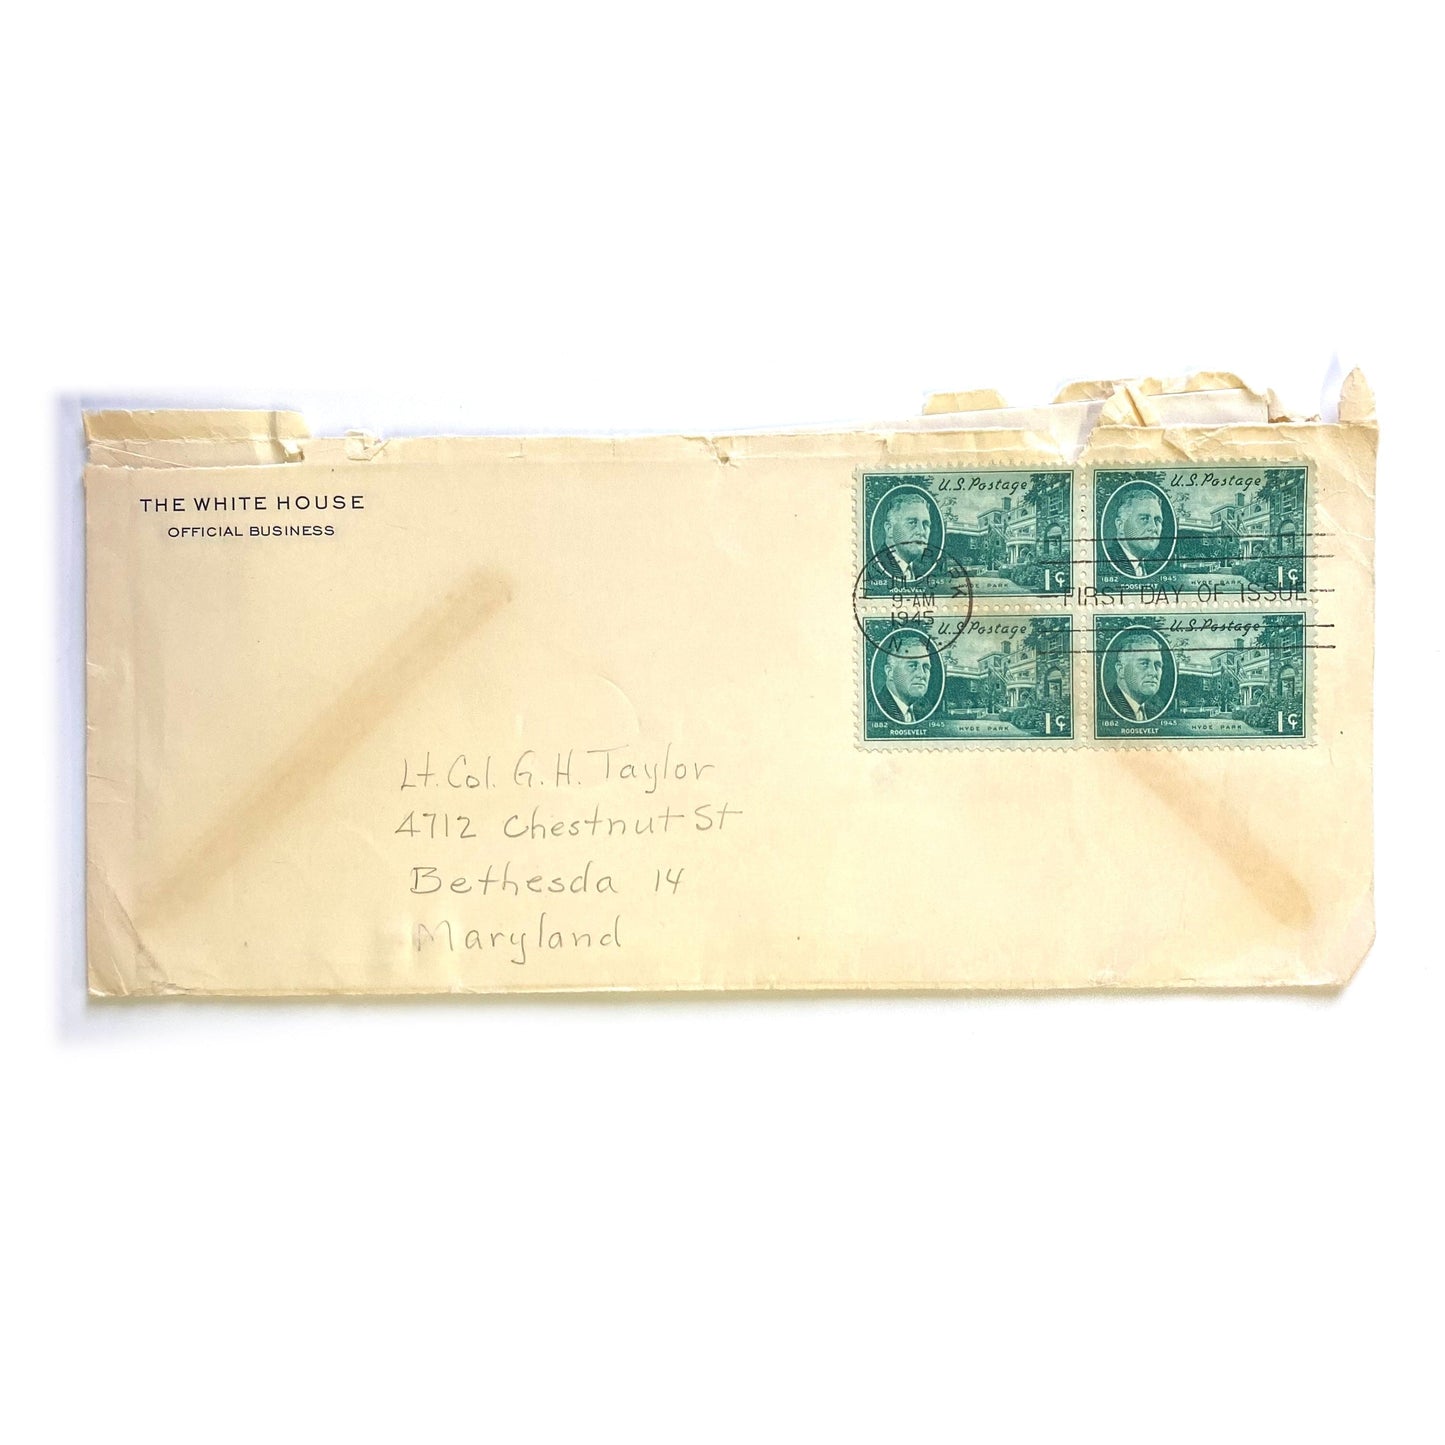 1945 US Postage Stamp & Envelope THE WHITE HOUSE - Official Correspondence